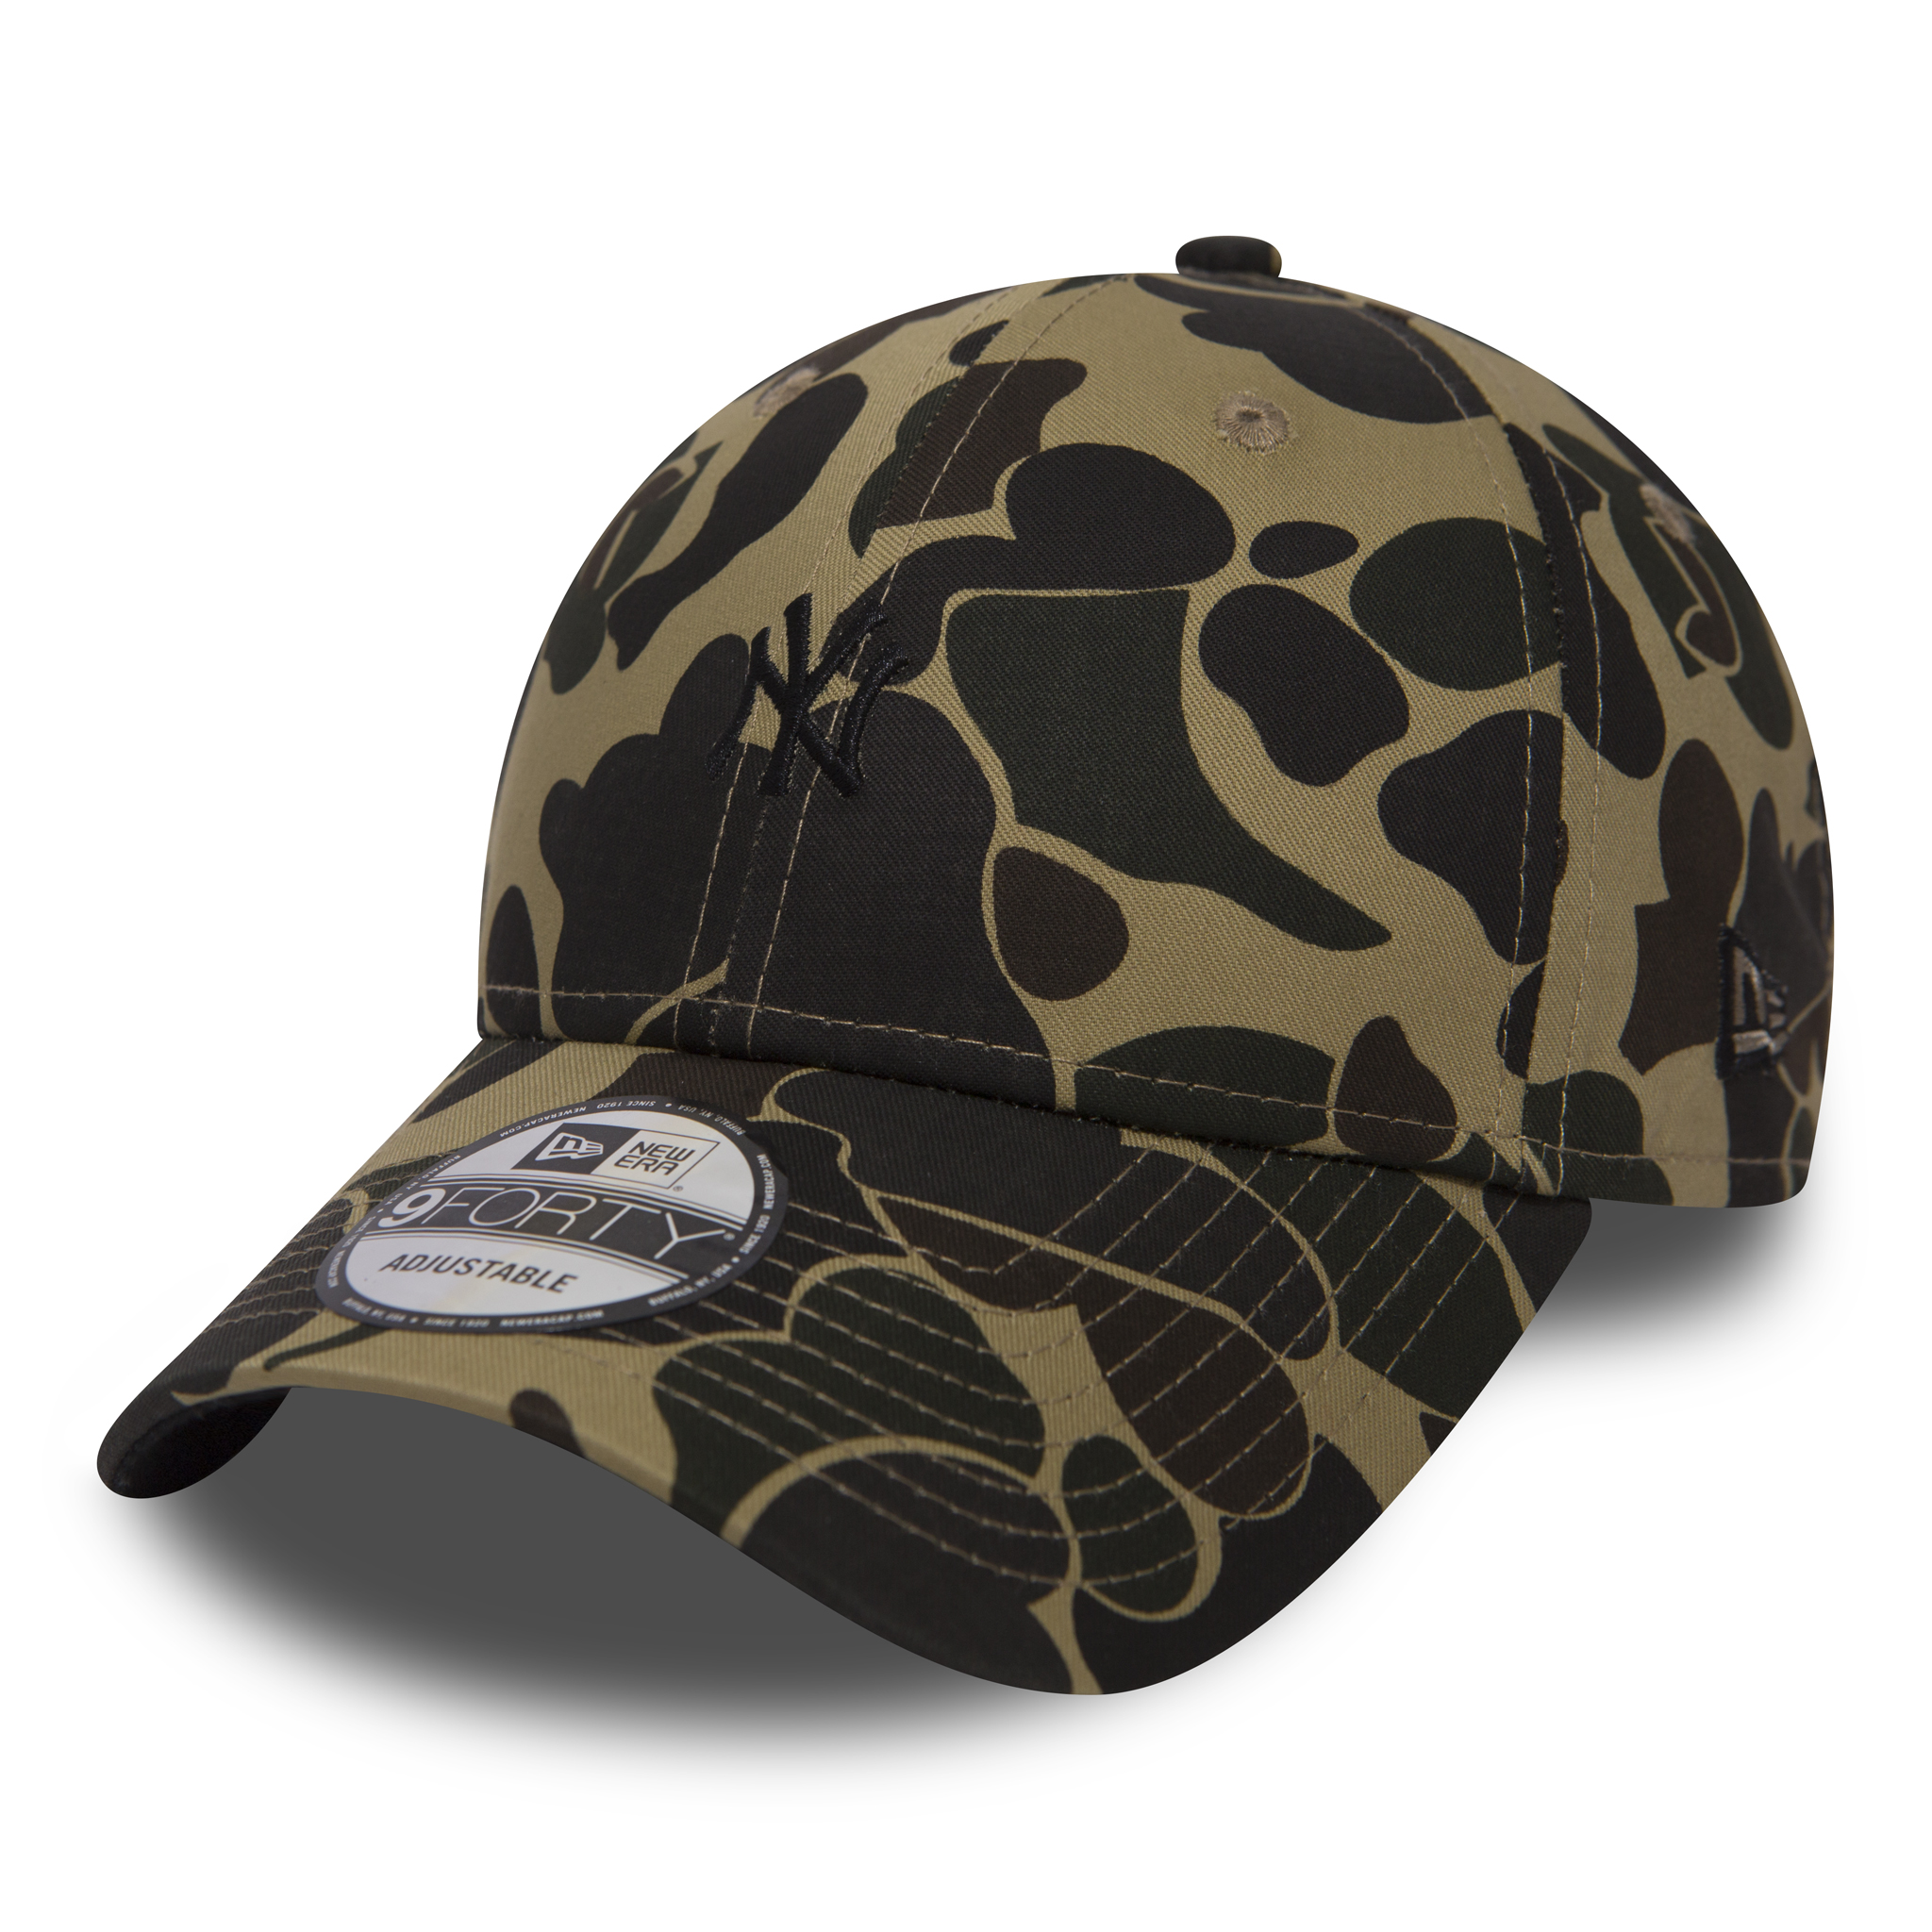 New York Yankees 9FORTY-Kappe in Camouflage